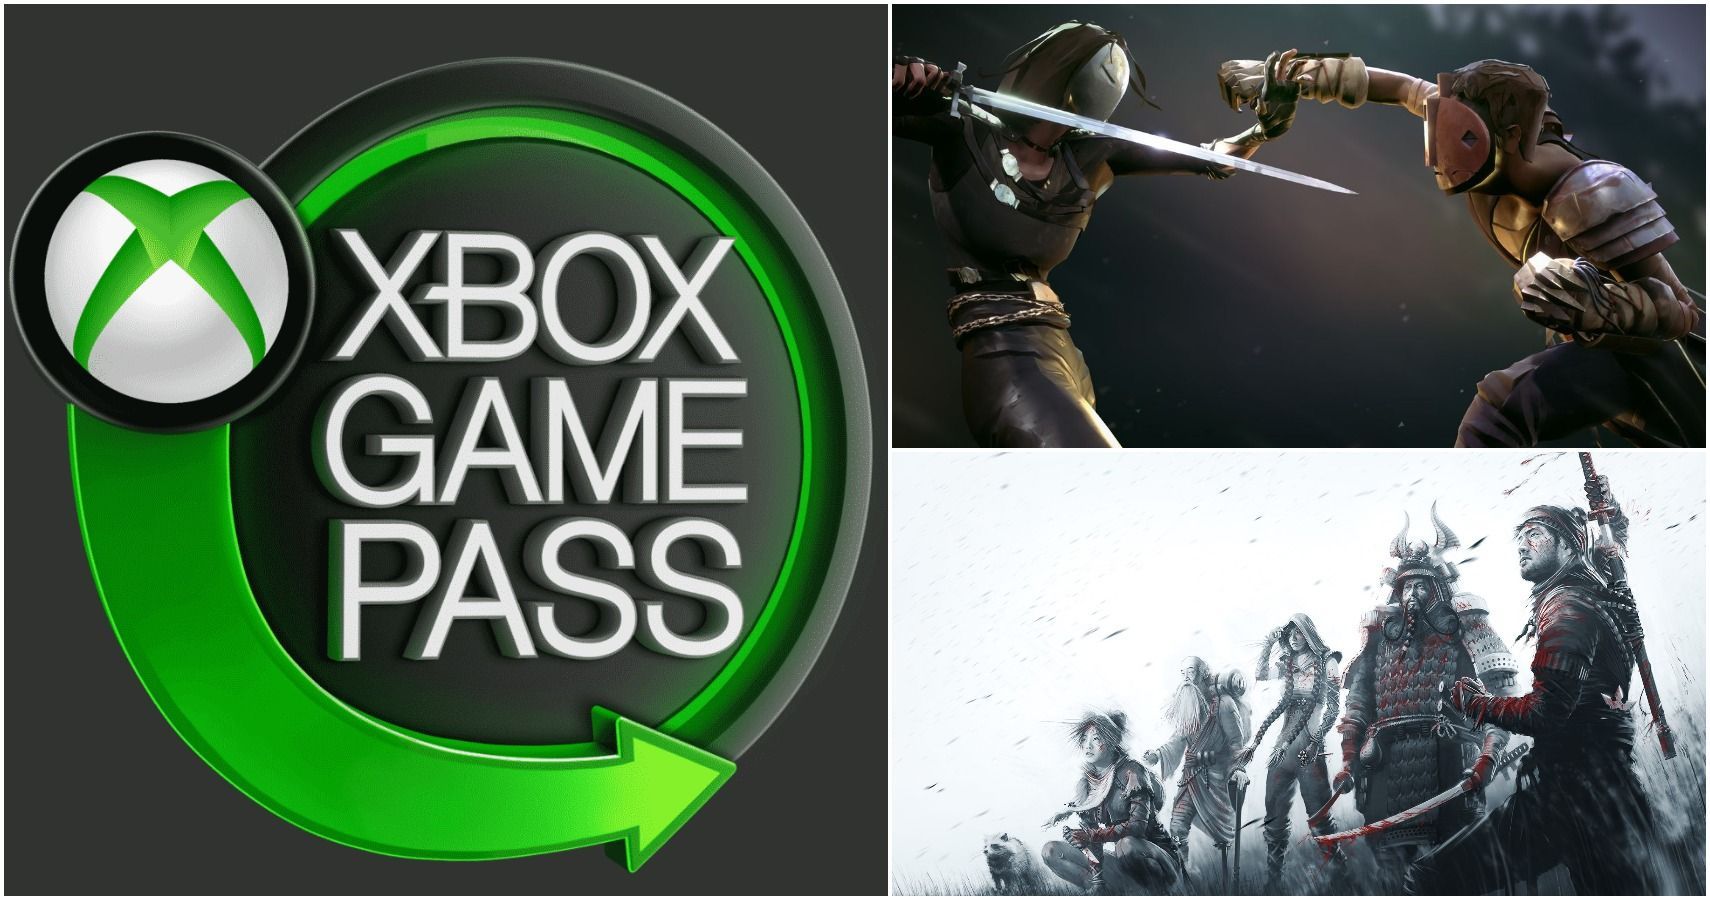 cancelling game pass in xbox app on pc